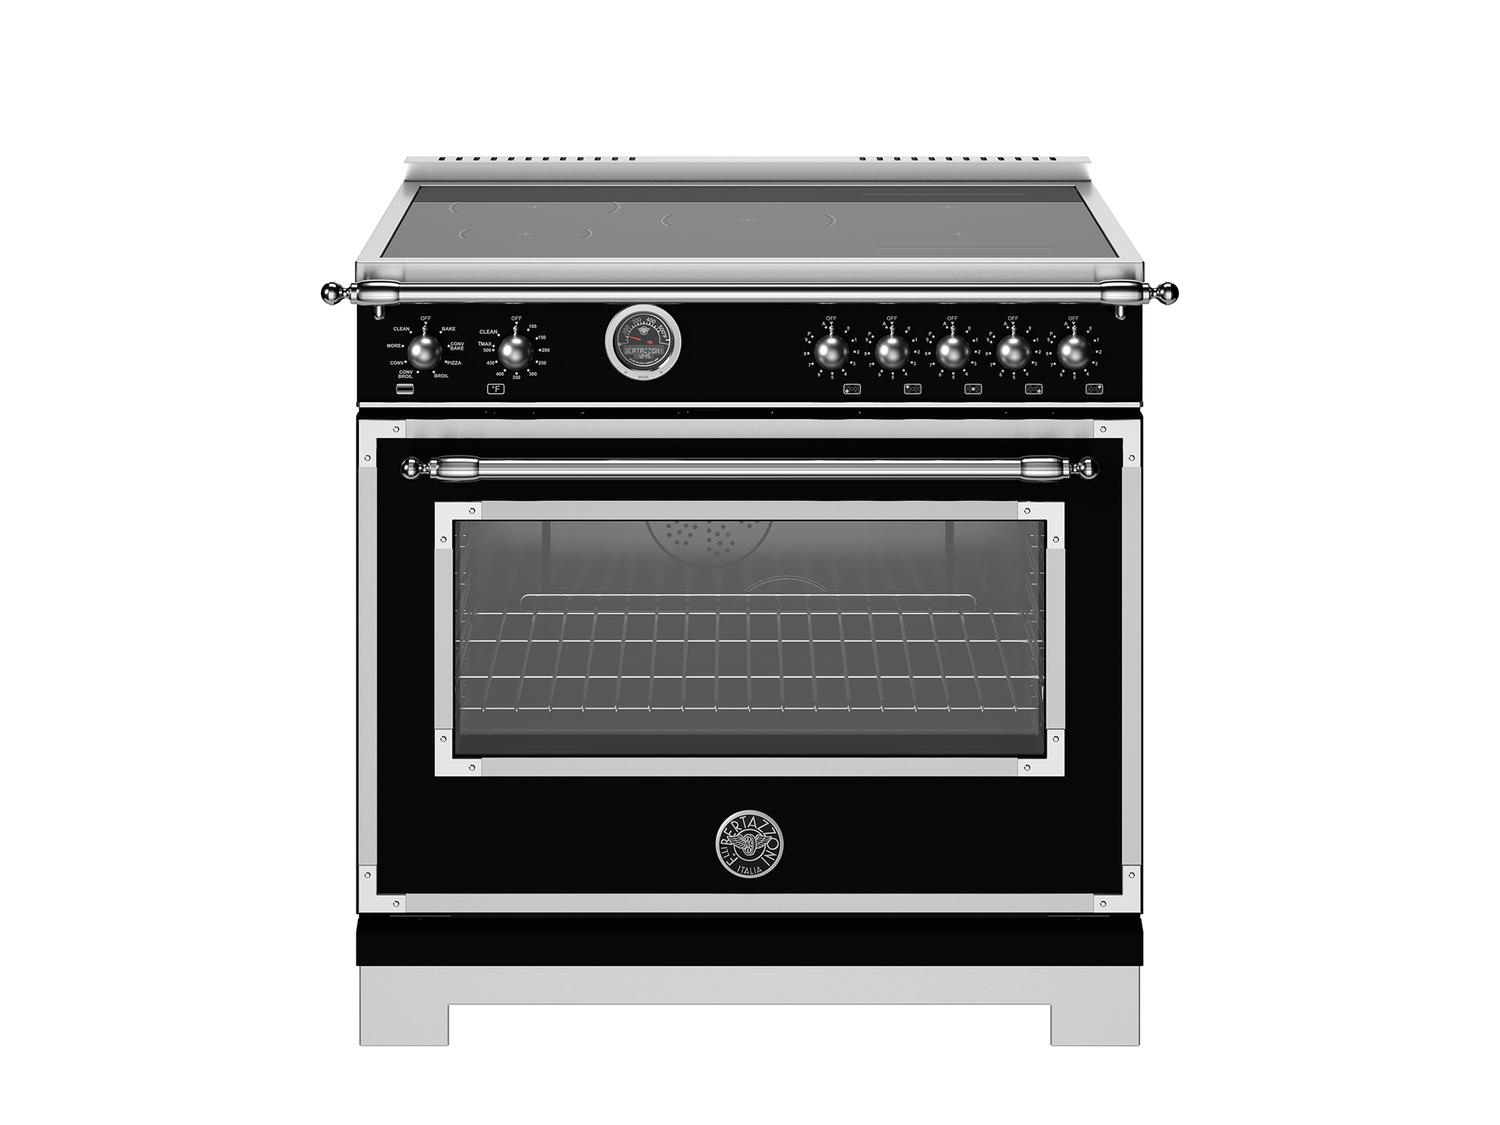 Bertazzoni HER365ICFEPNET 36 Inch Induction Range, 5 Heating Zones And Cast Iron Griddle, Electric Self-Clean Oven Nero